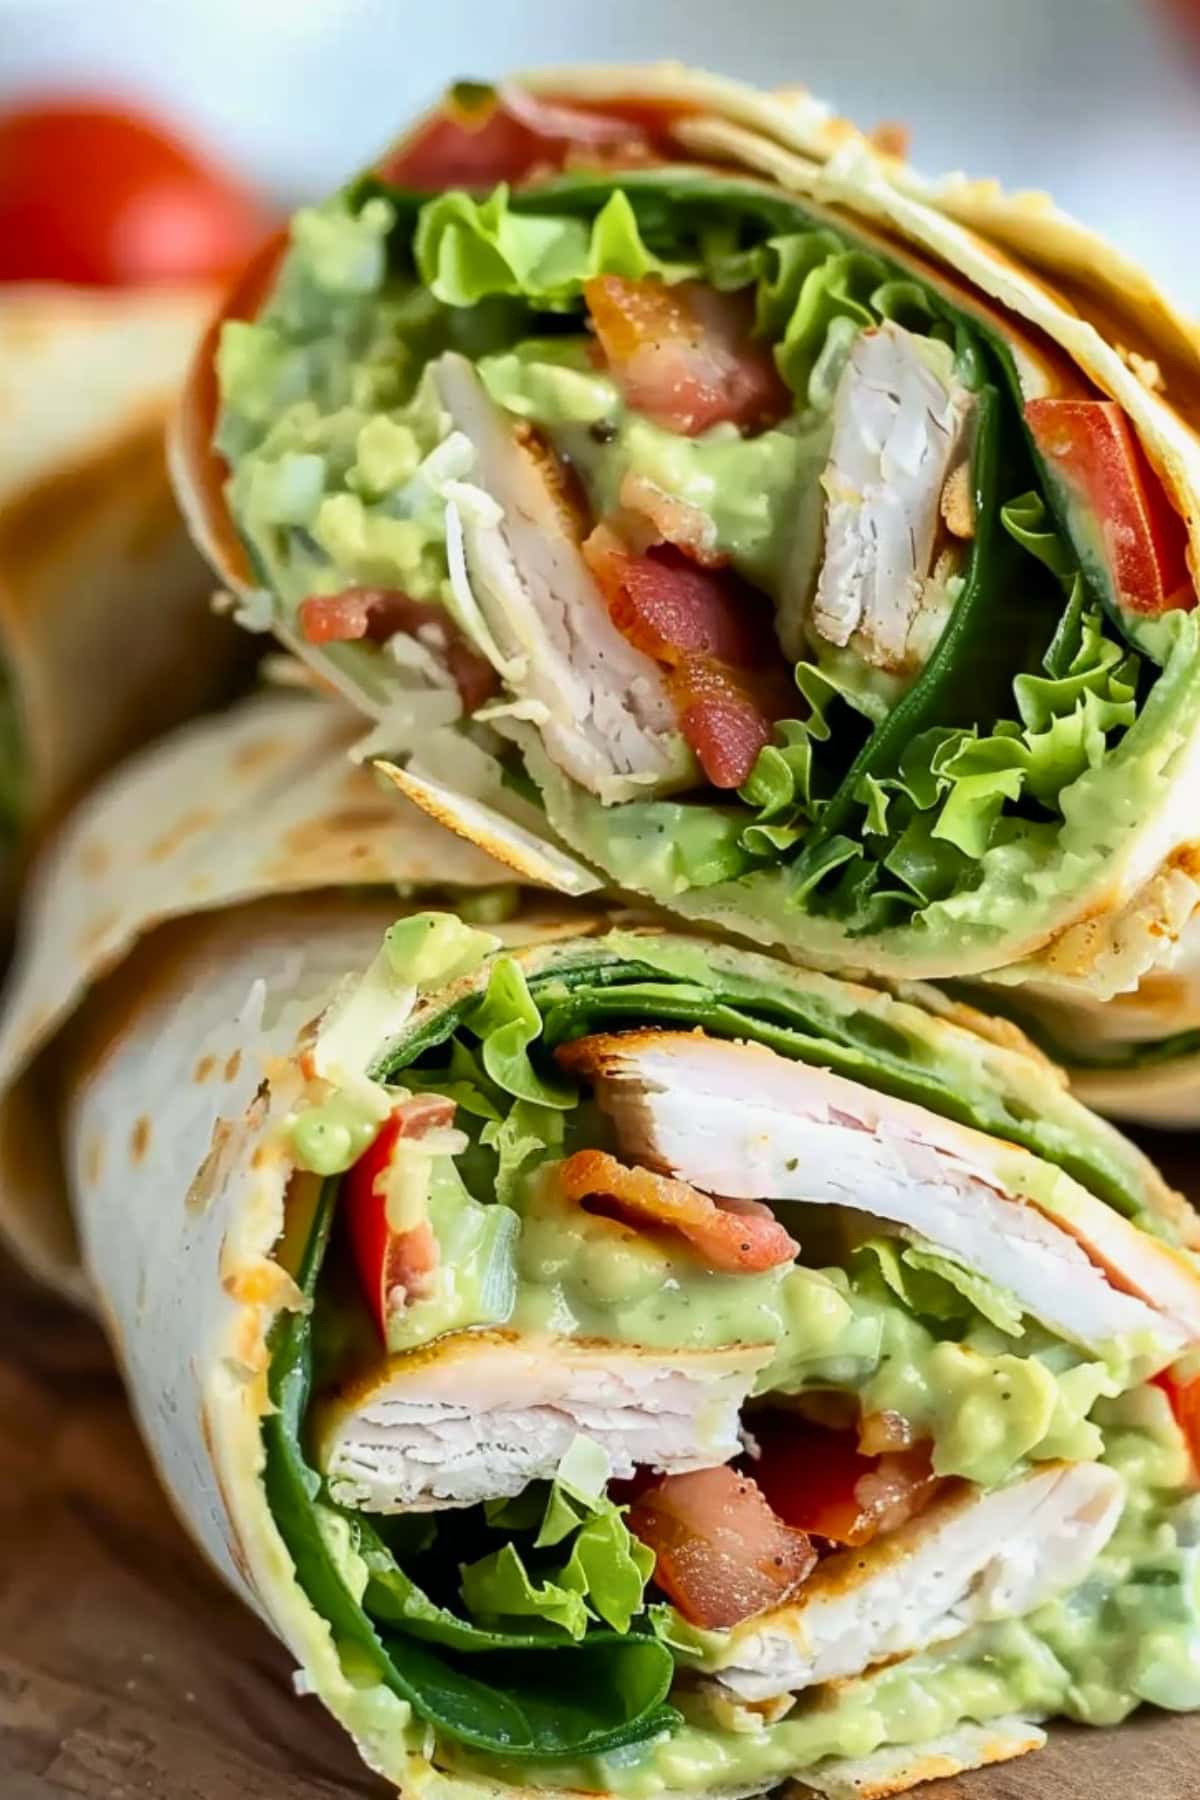 Sliced in half tortilla wrap with mashed avocado, turkey, tomatoes, bacon and shredded lettuce filling.